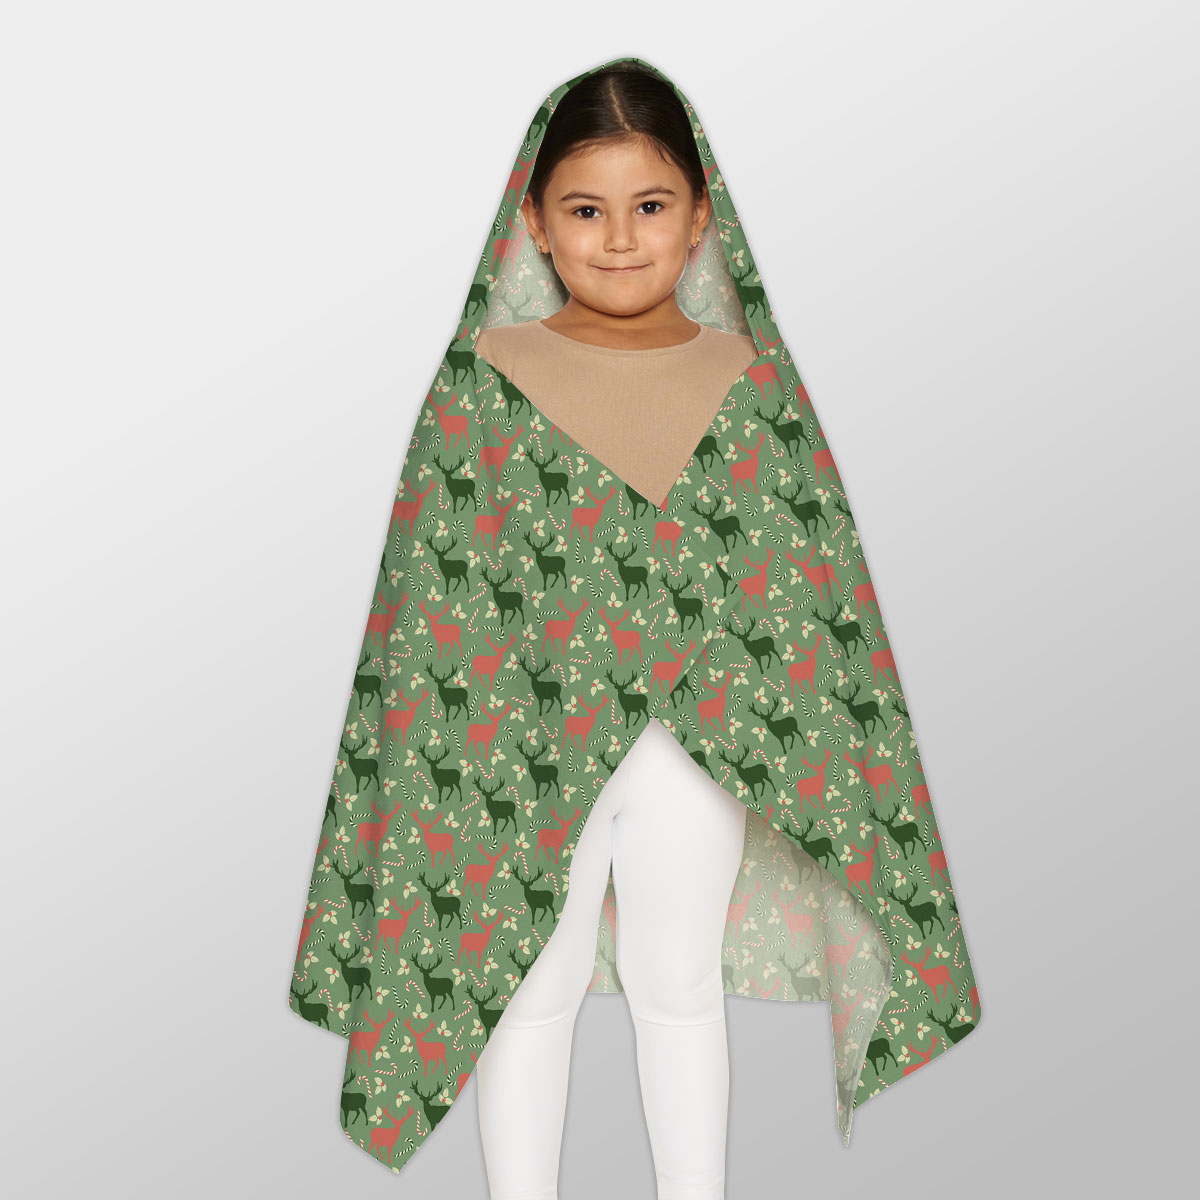 Reindeer, Christmas Flowers And Candy Canes Youth Hooded Towel